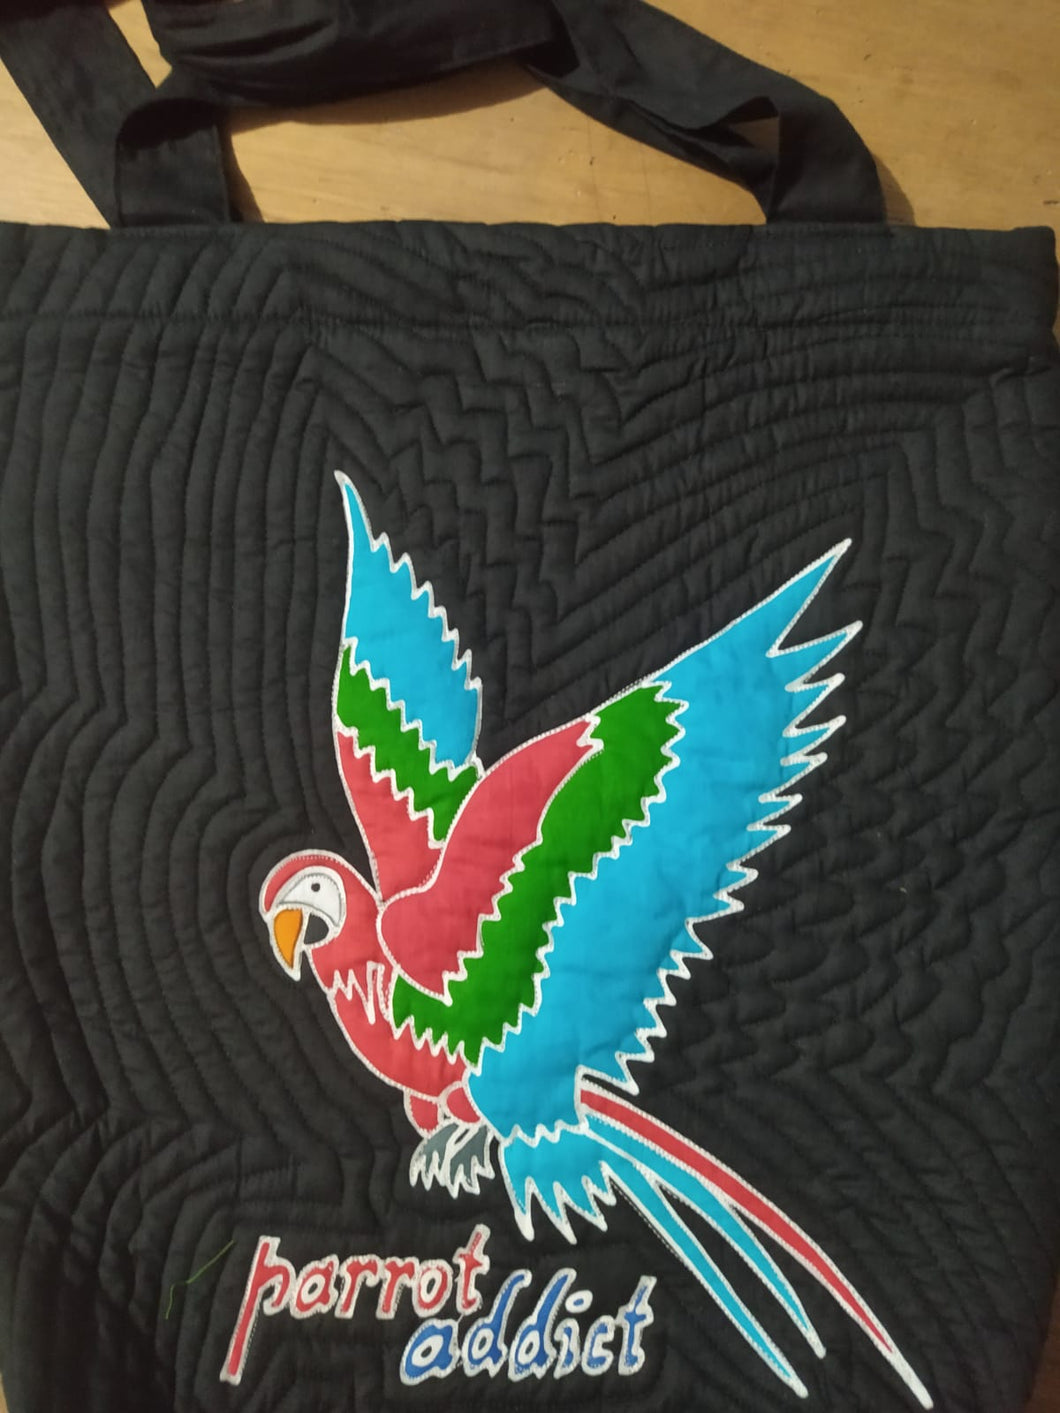 A stylized macaw with outspread wings has been batiked and painted by hand onto this quilted should bag. The words 